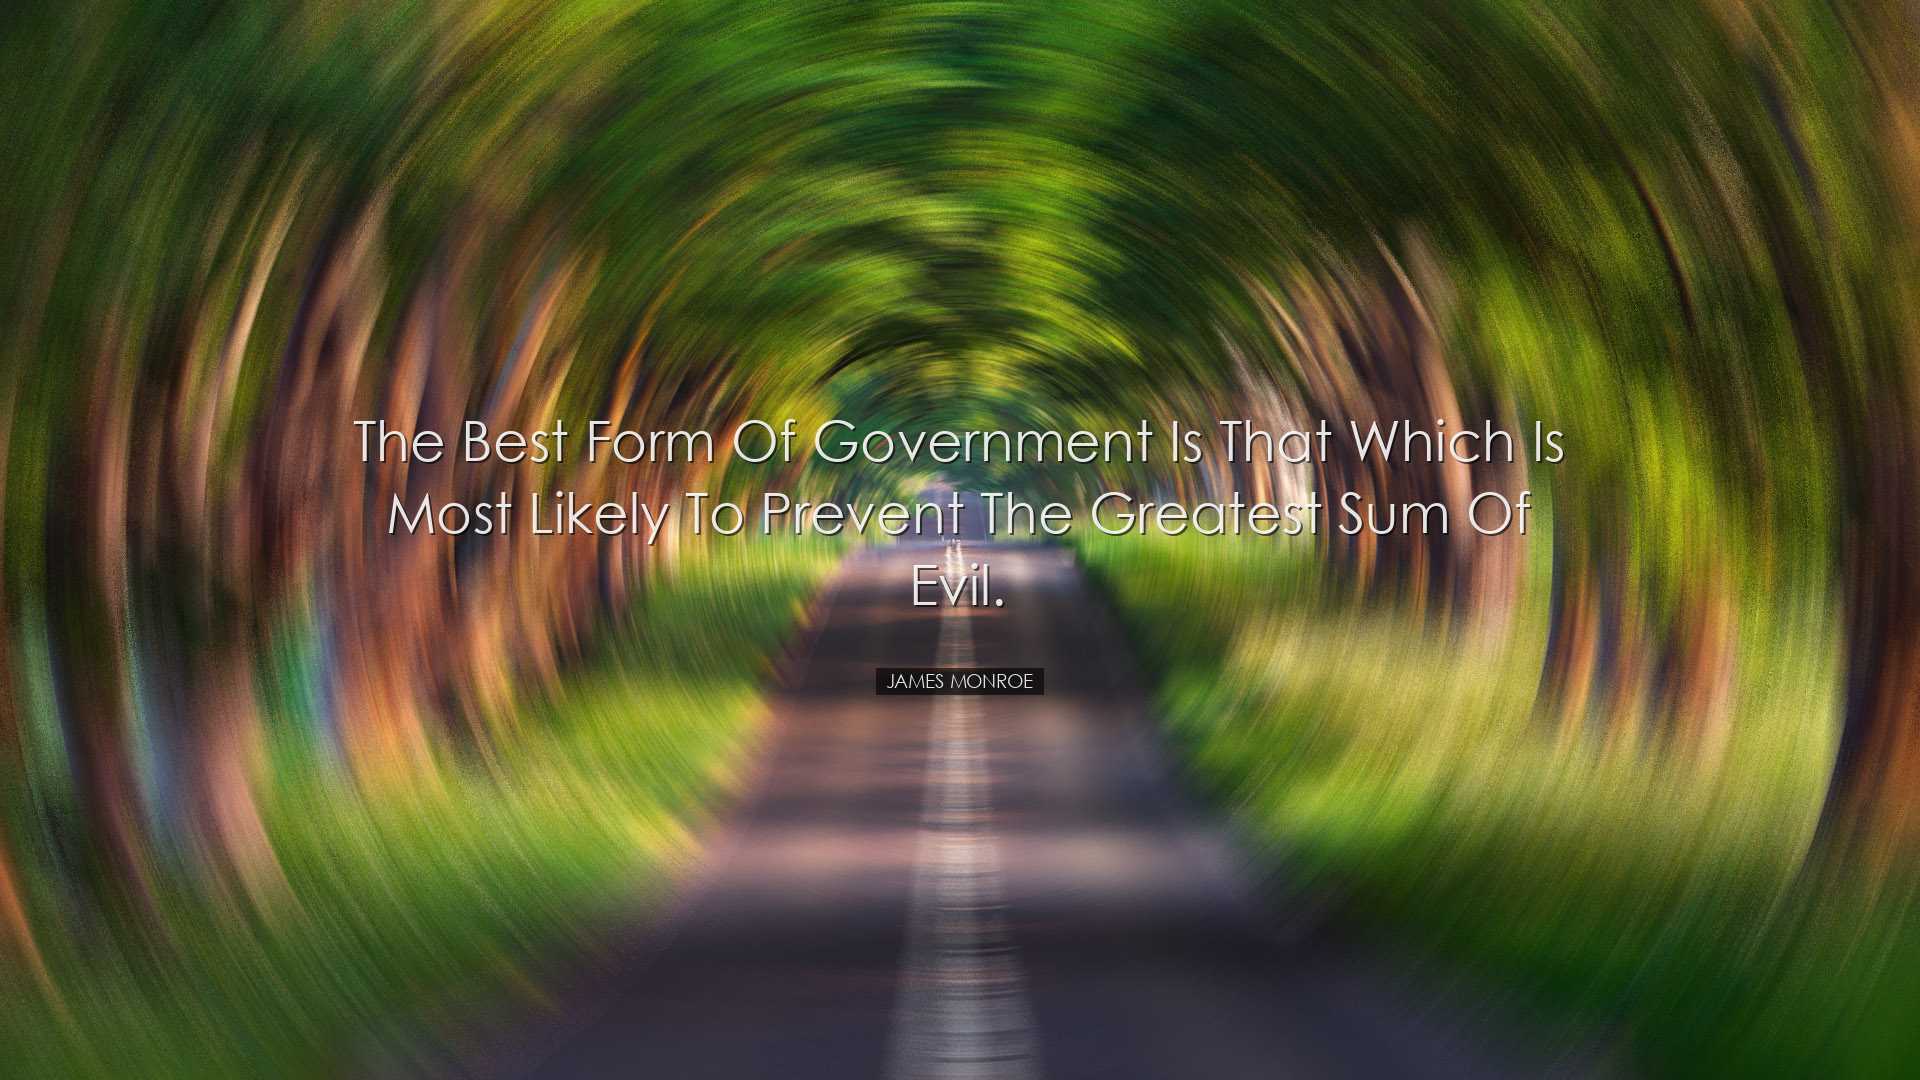 The best form of government is that which is most likely to preven